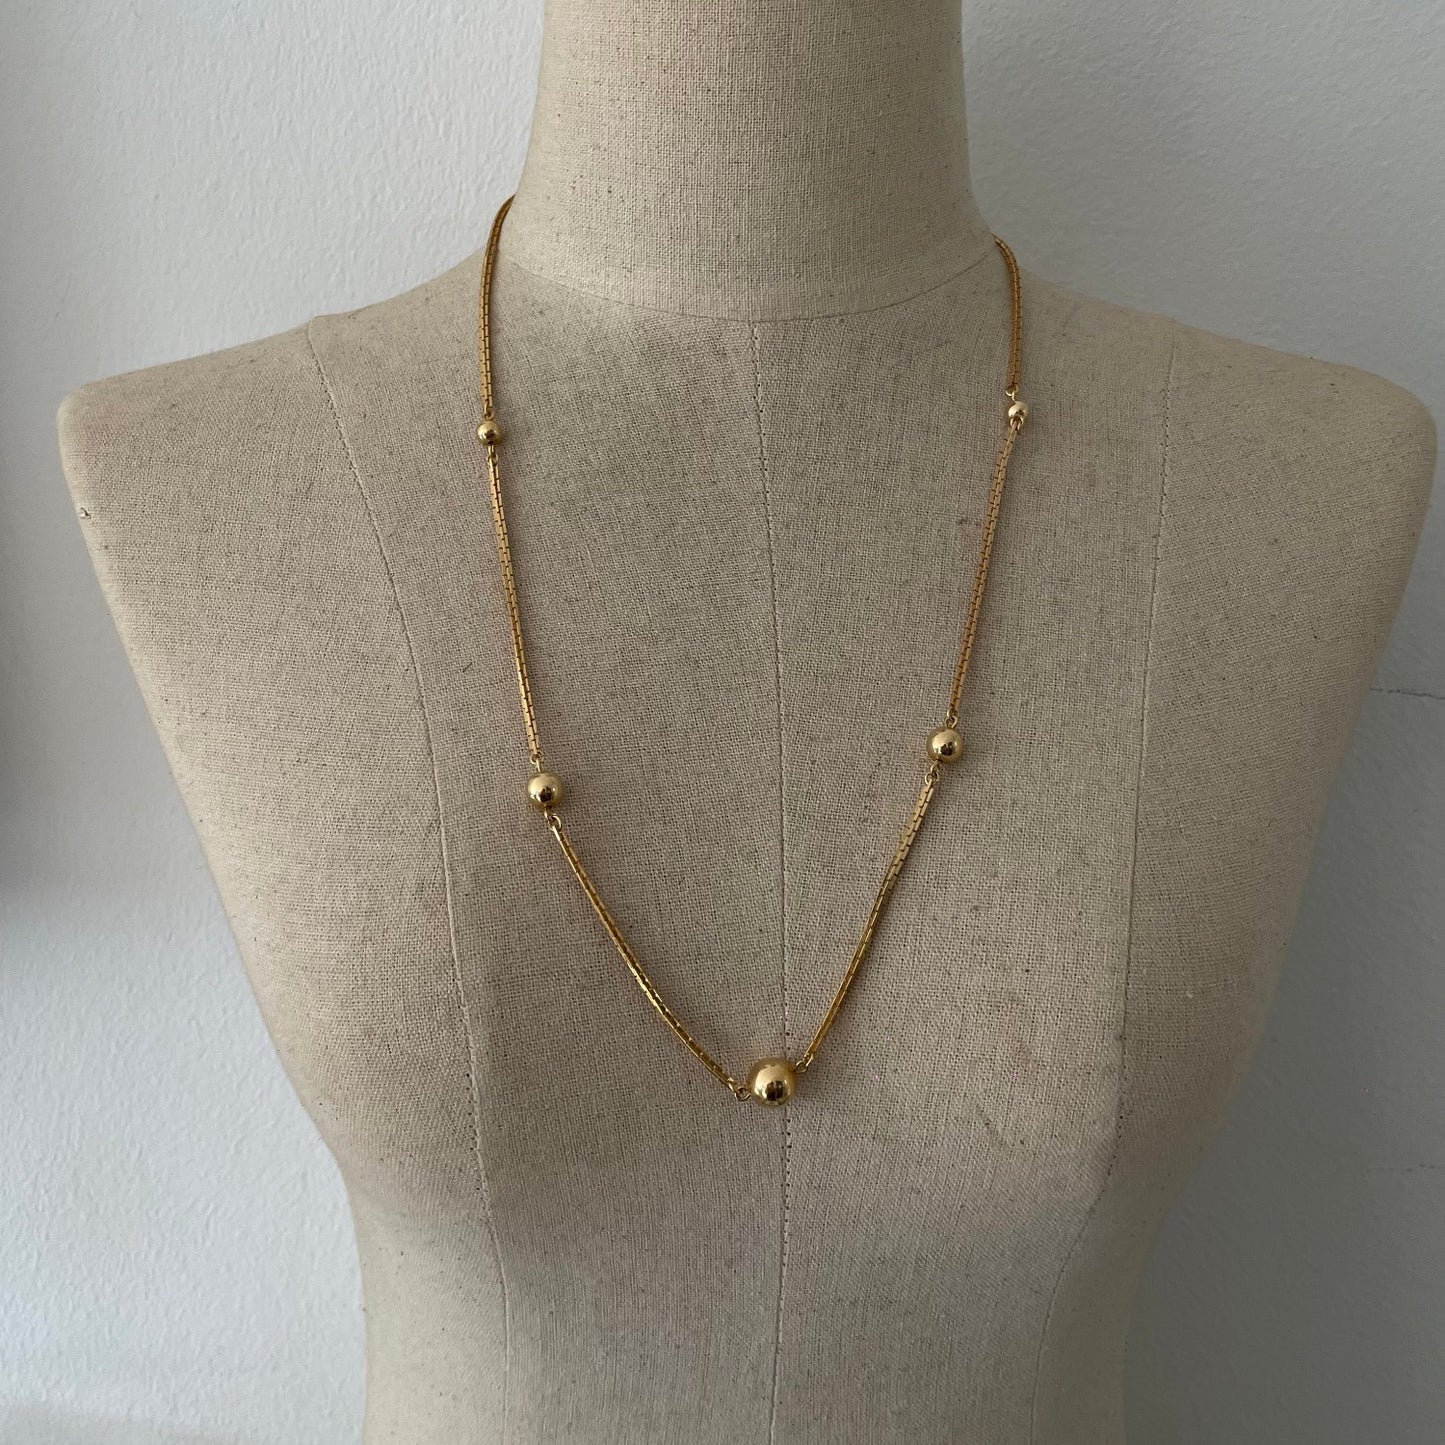 Vintage 70s Avon Gold-Tone Box Chain With Gold Beads Necklace